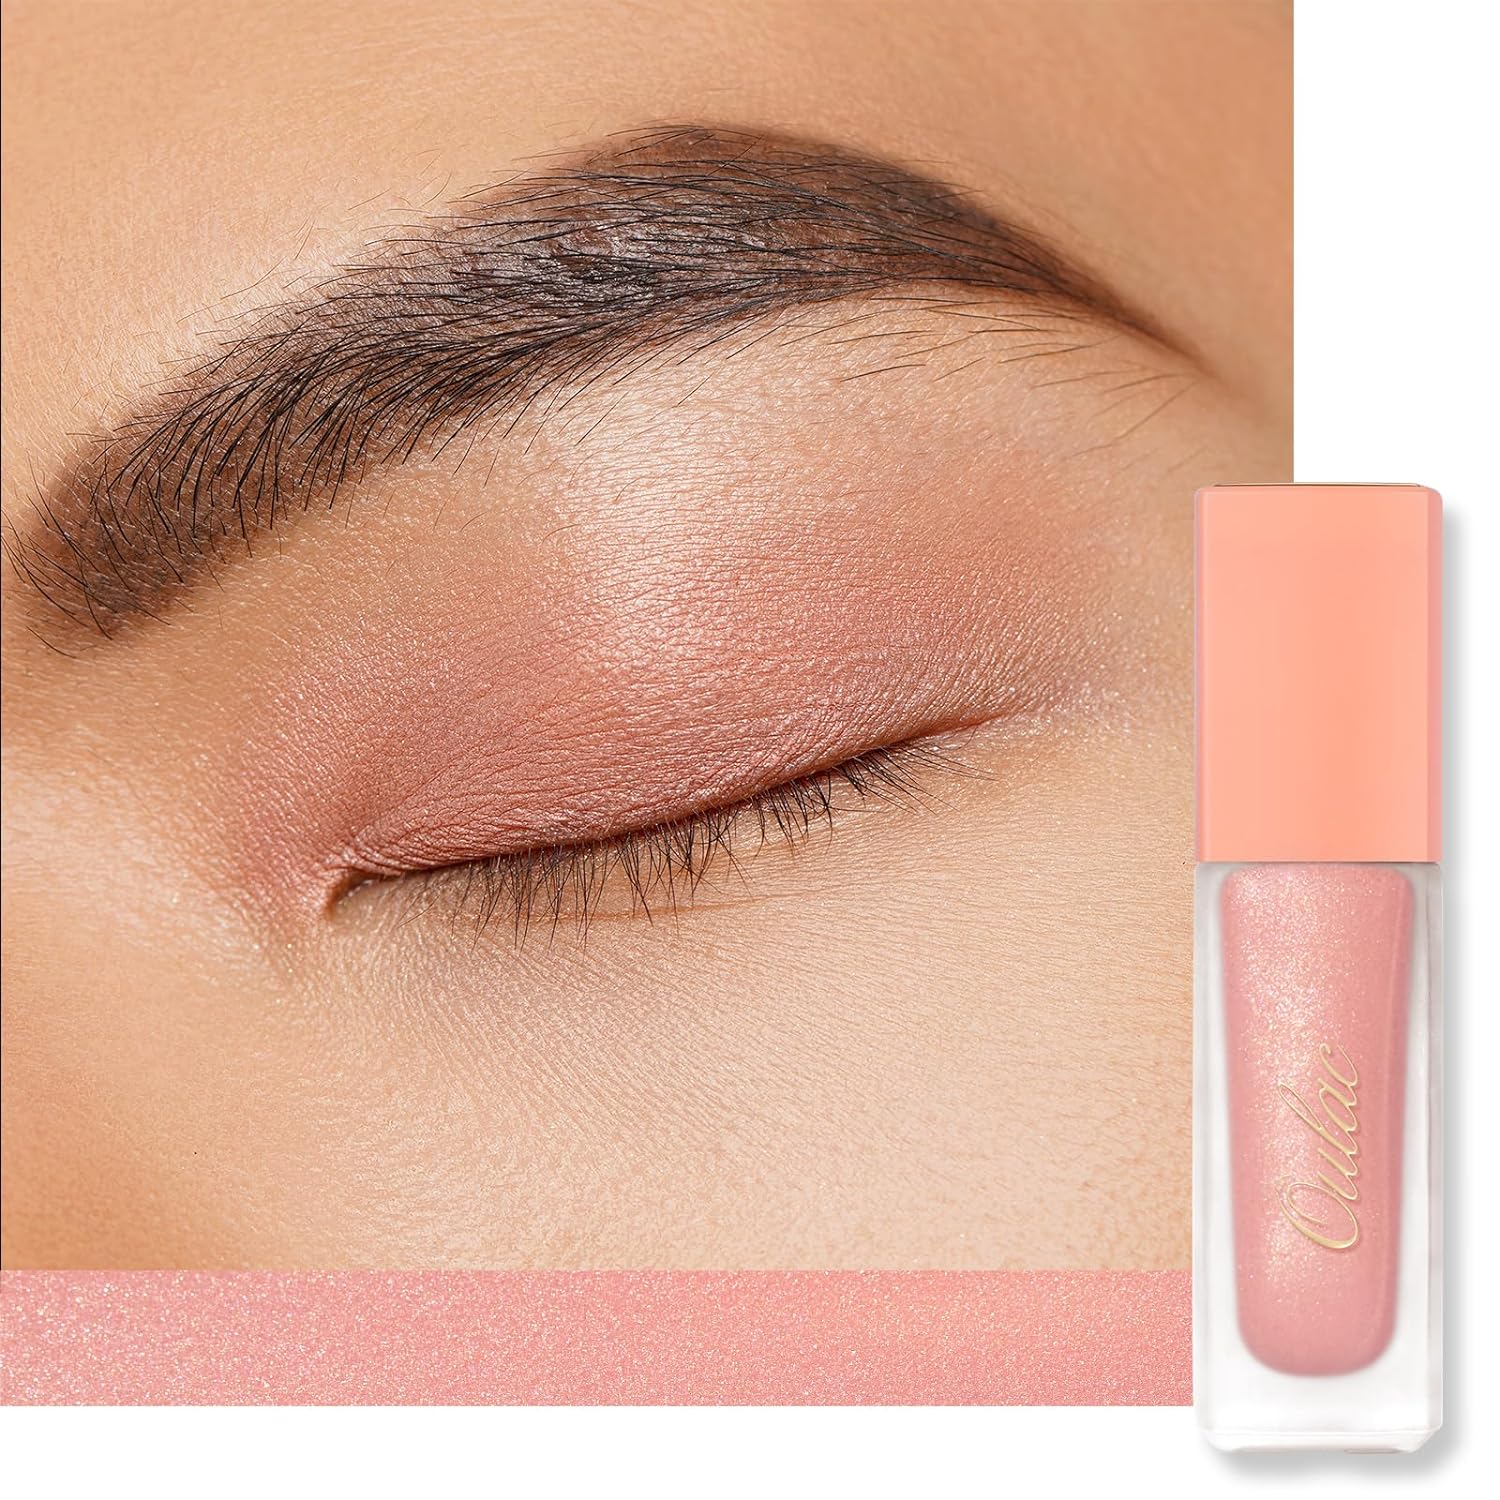 Oulac Matte Pink Eyeshadow Shimmer Finish Liquid Eyeshadow Eyeshadow Base&Liquid Rouge Duo| Buildable Smooth Eye Makeup, Wrinkle Resistant, Vegan, Cruelty-Free SA04